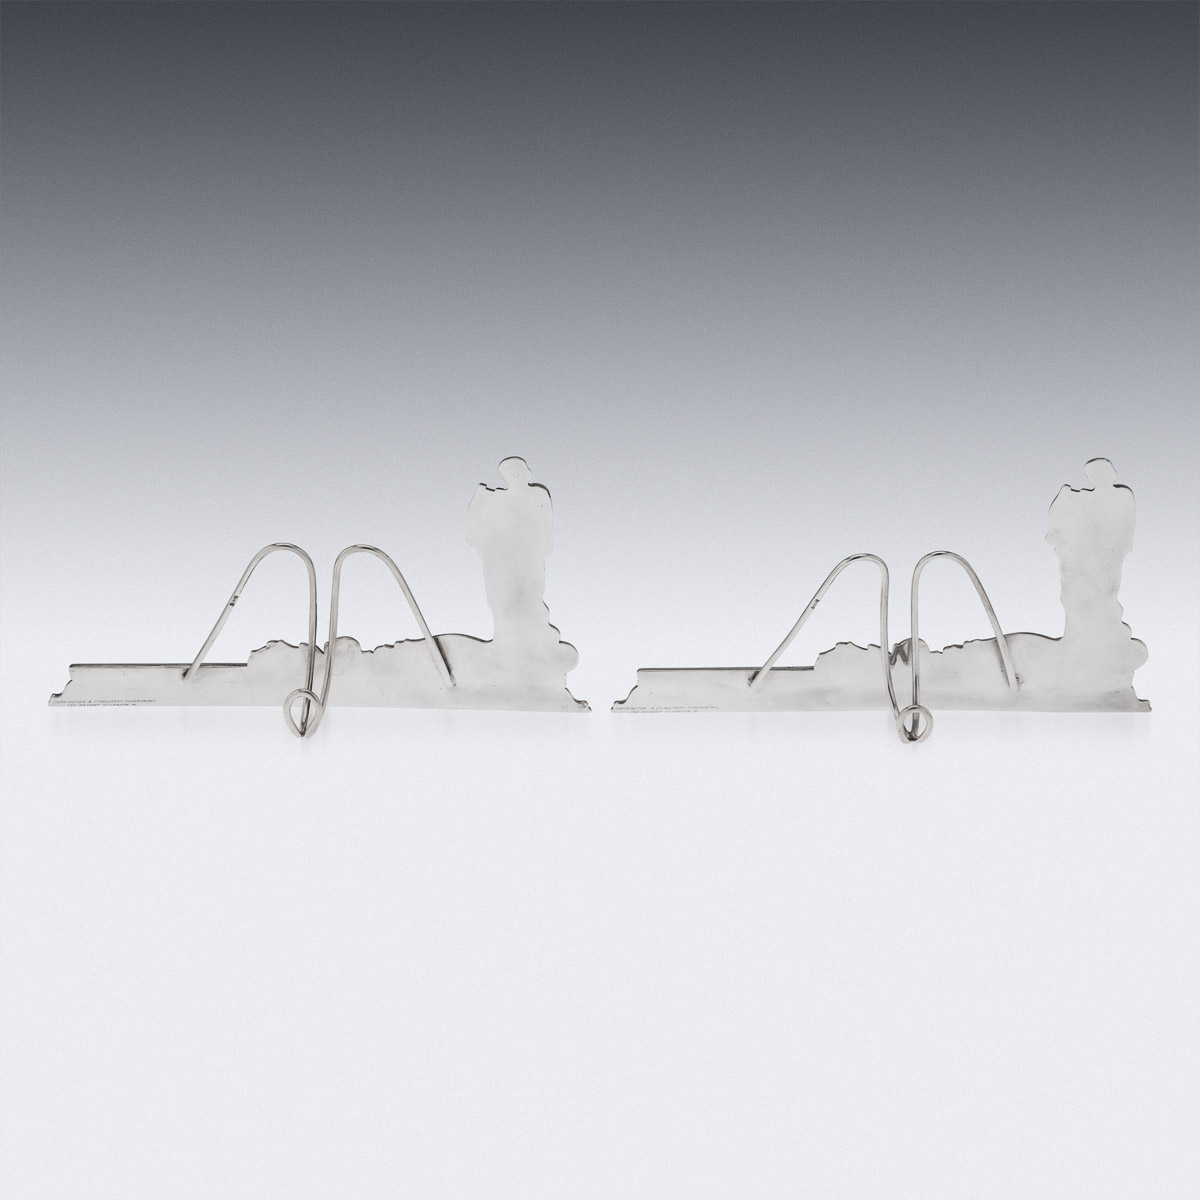 A PAIR OF STERLING SILVER MUSIC SHEET STANDS, CARRINGTON & CO. C. 1910 - Image 3 of 16